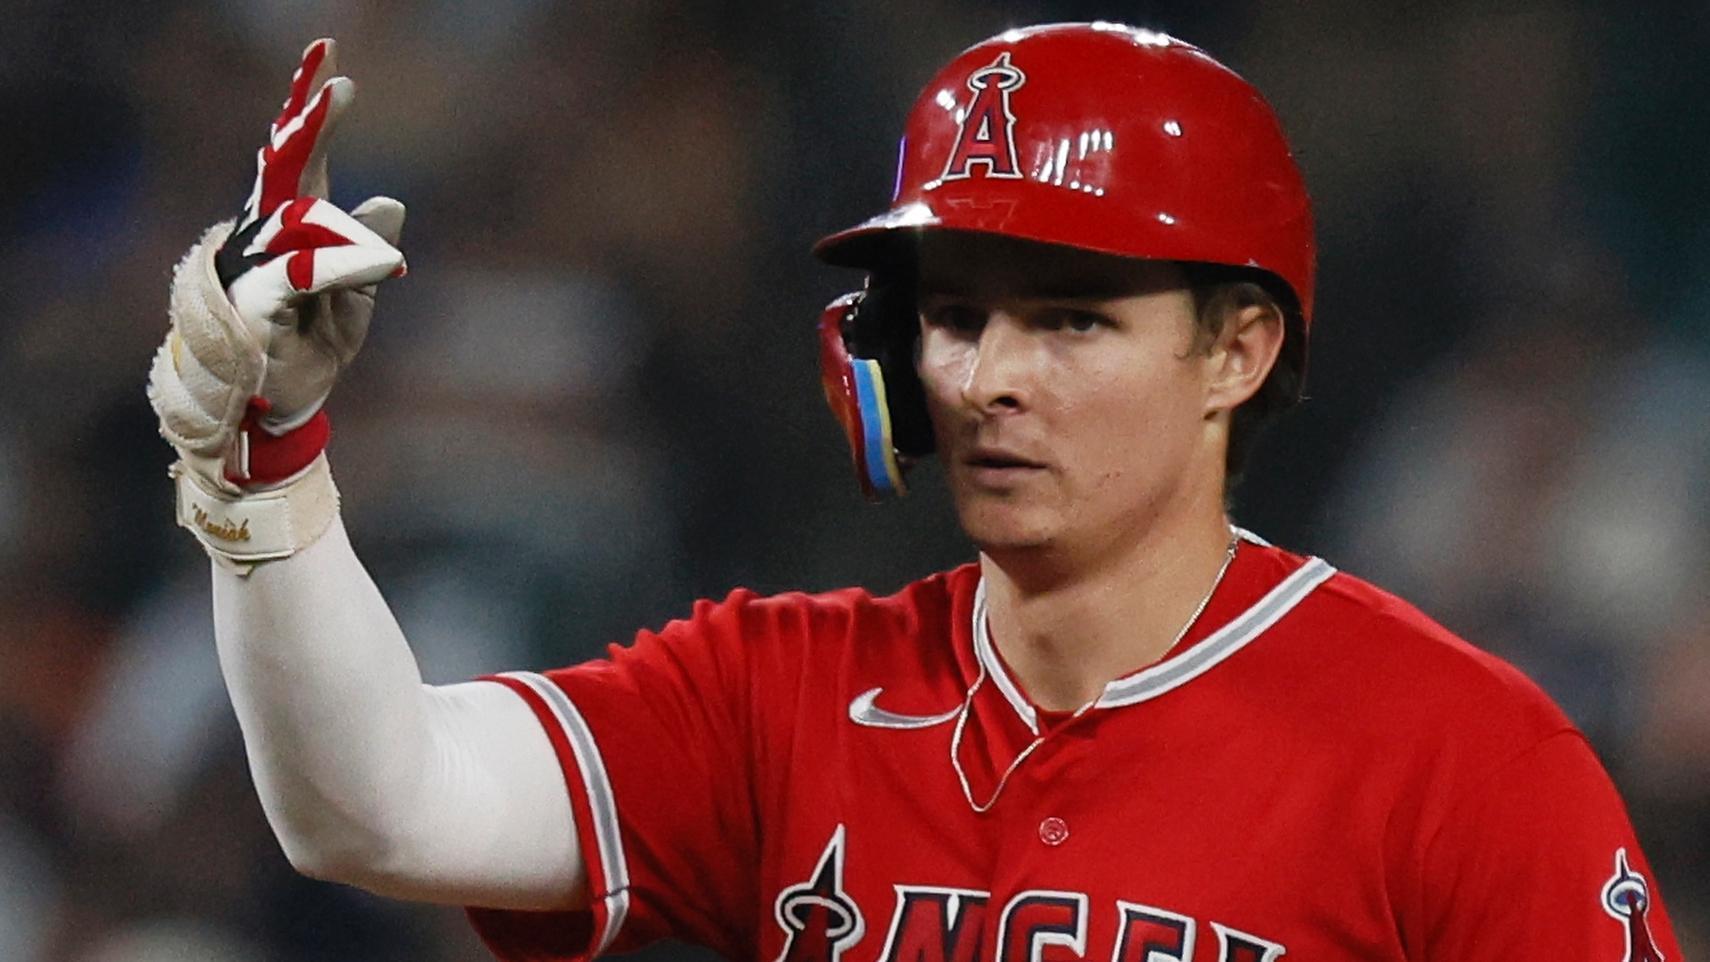 Mickey Moniak making an impact as Angels take series from Red Sox